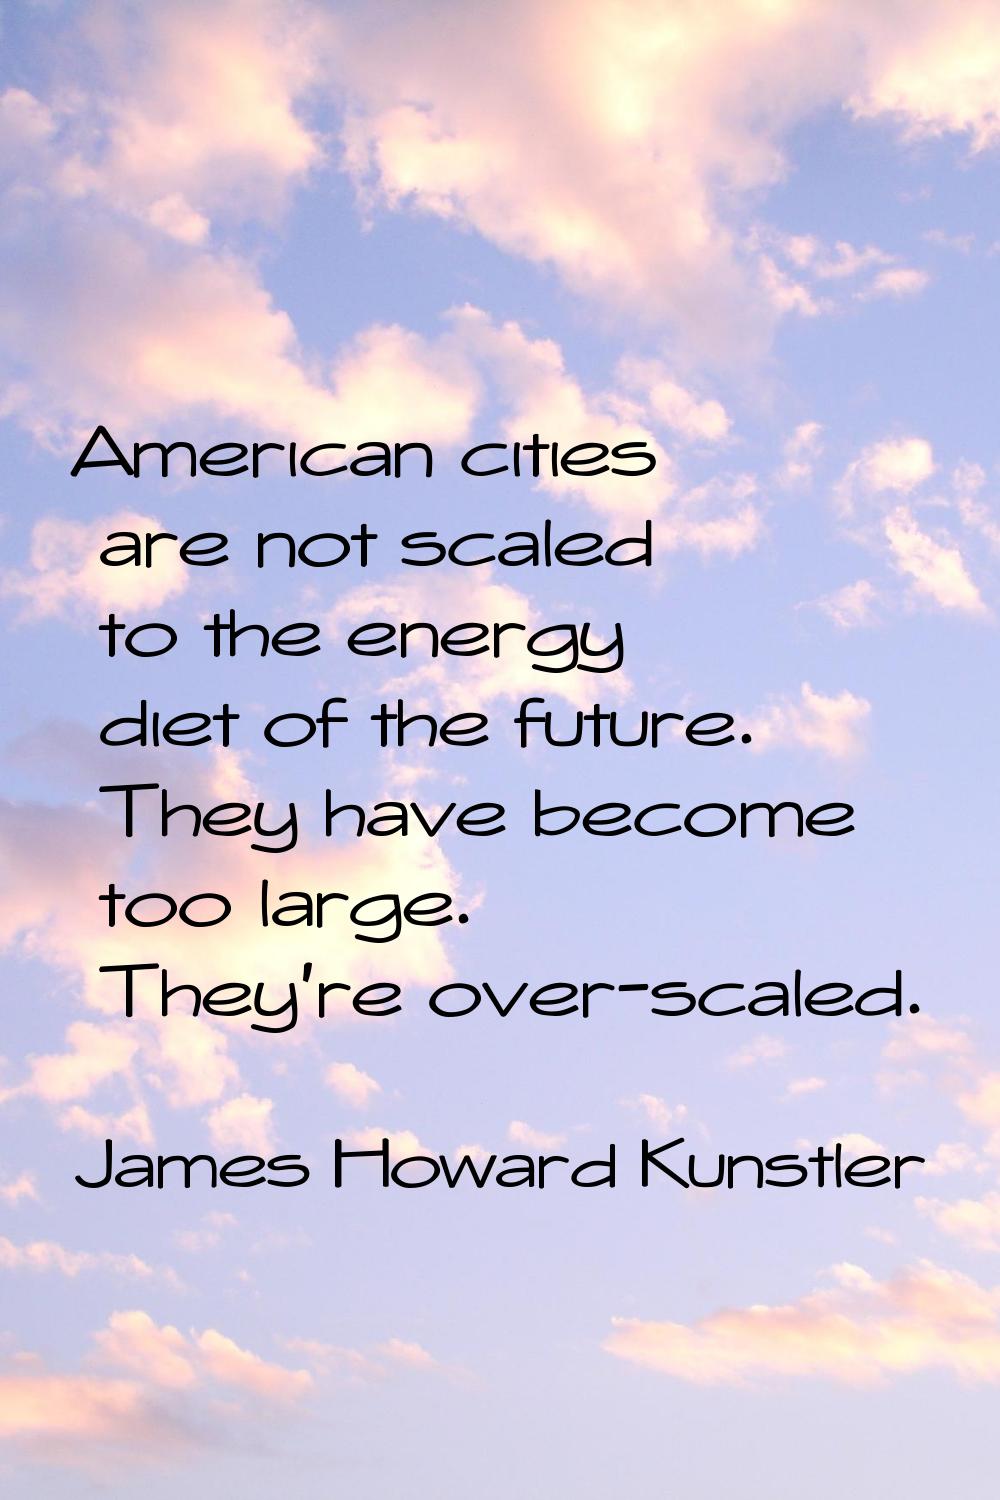 American cities are not scaled to the energy diet of the future. They have become too large. They'r